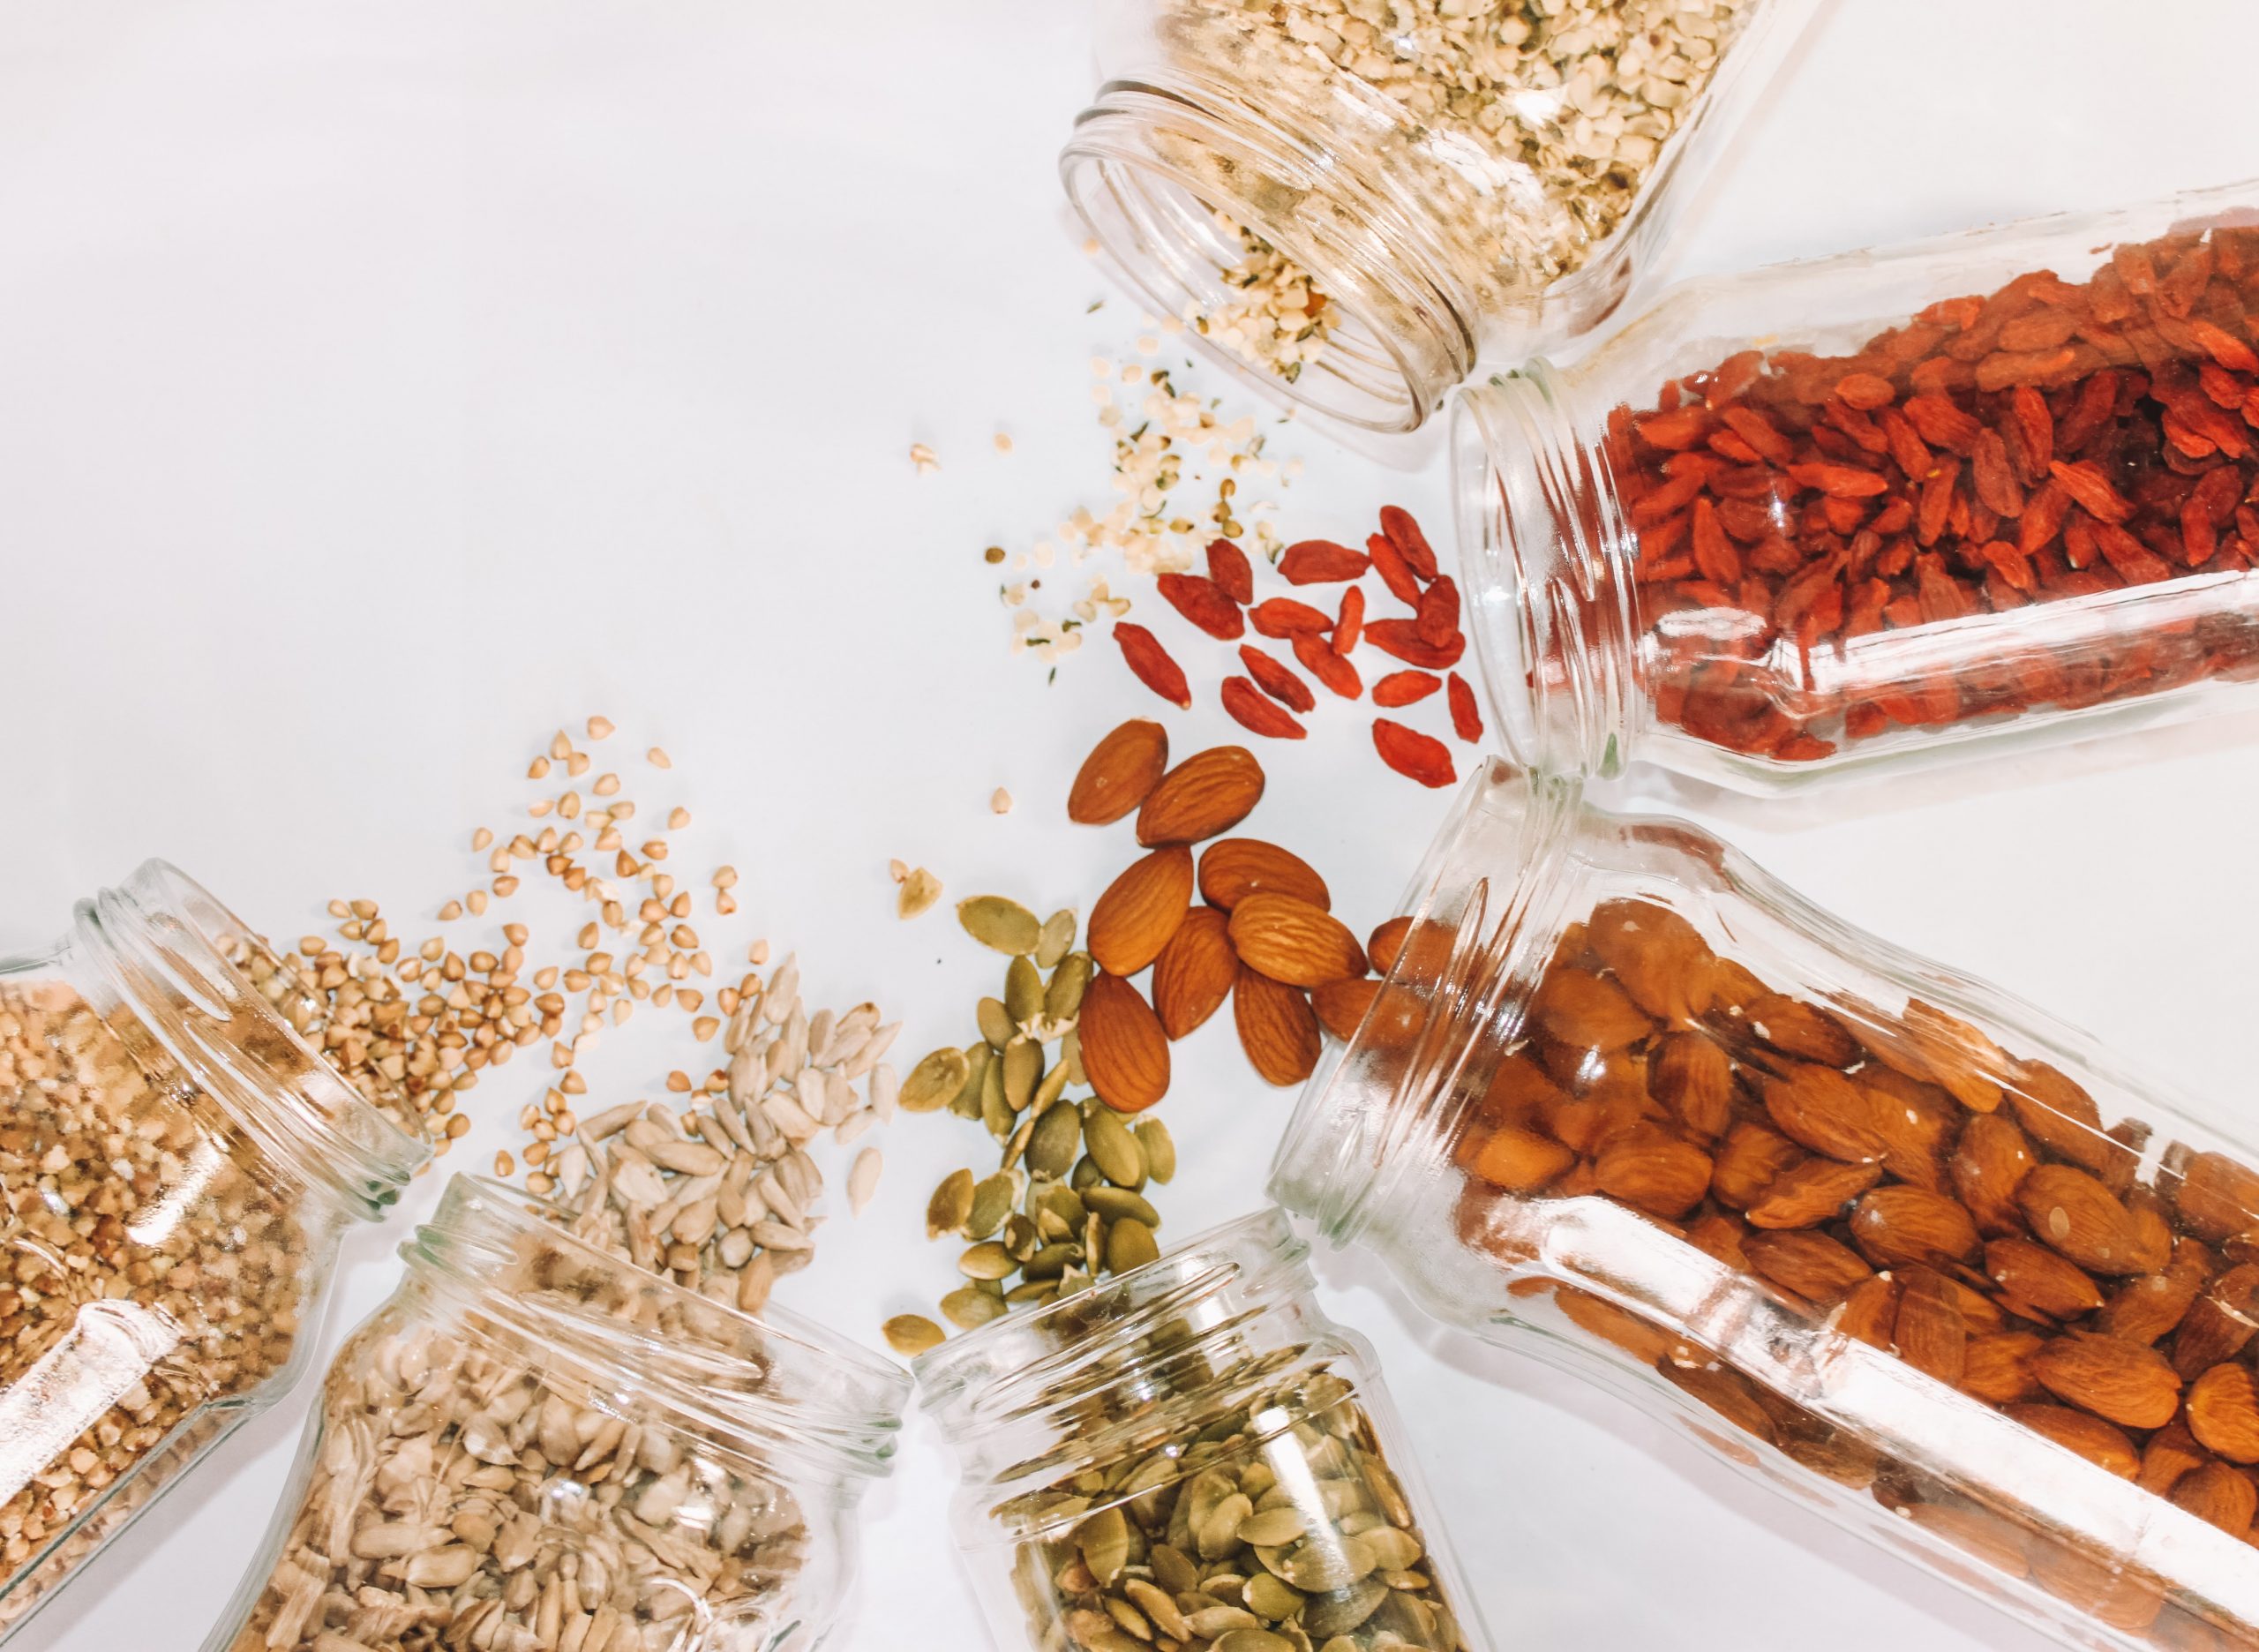 Nuts, seeds and dried fruit - healthy, nutritious ideas for yoghurt bark toppings